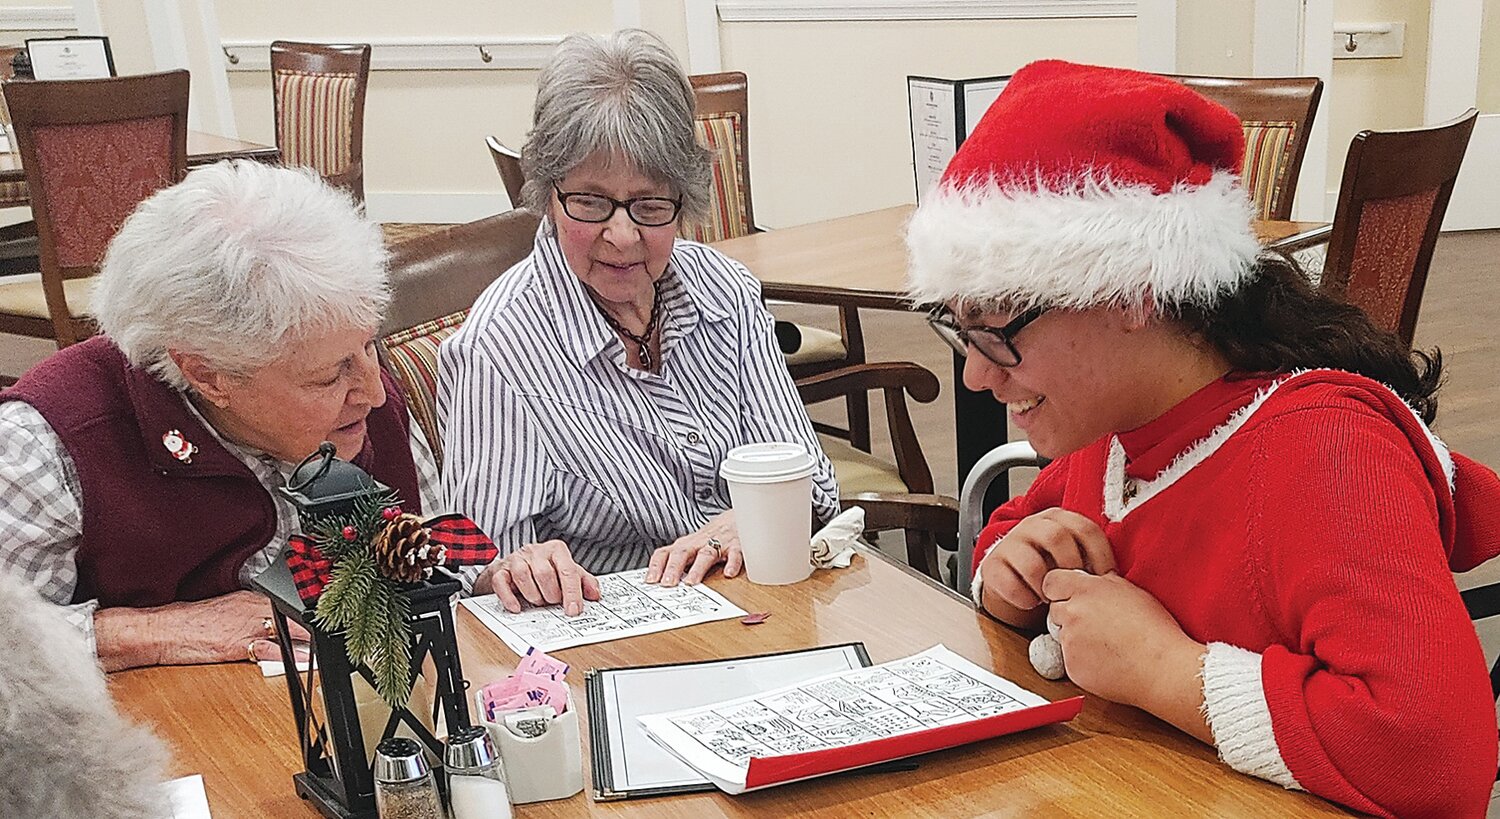 Residents of Morningside House of Towamencin in Montgomery County put their heads together to match pictures with the Christmas carols they depict as Zoe from Horsin’ Around, a Bucks County 4-H club, lends a hand. Members of the 4-H club visited the center to spread some holiday cheer.